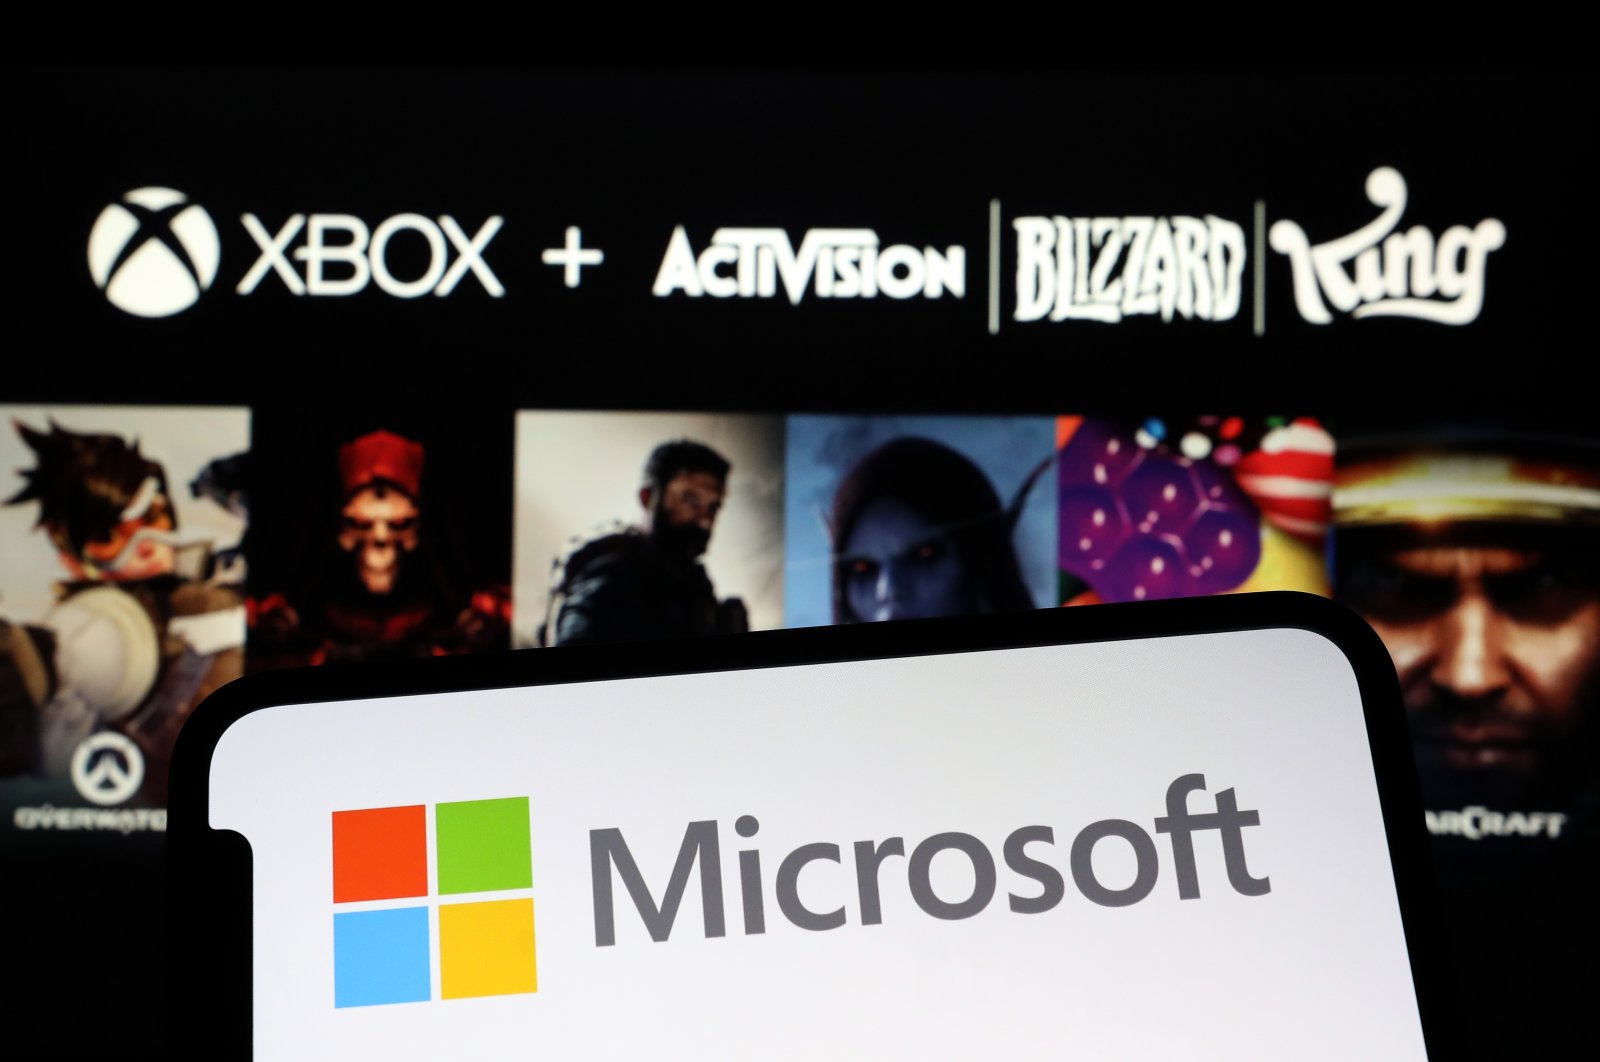 The Microsoft logo is seen on a phone screen in front of the official poster announcing the acquisition of Activision Blizzard, Jan. 18, 2022. (AA File Photo)